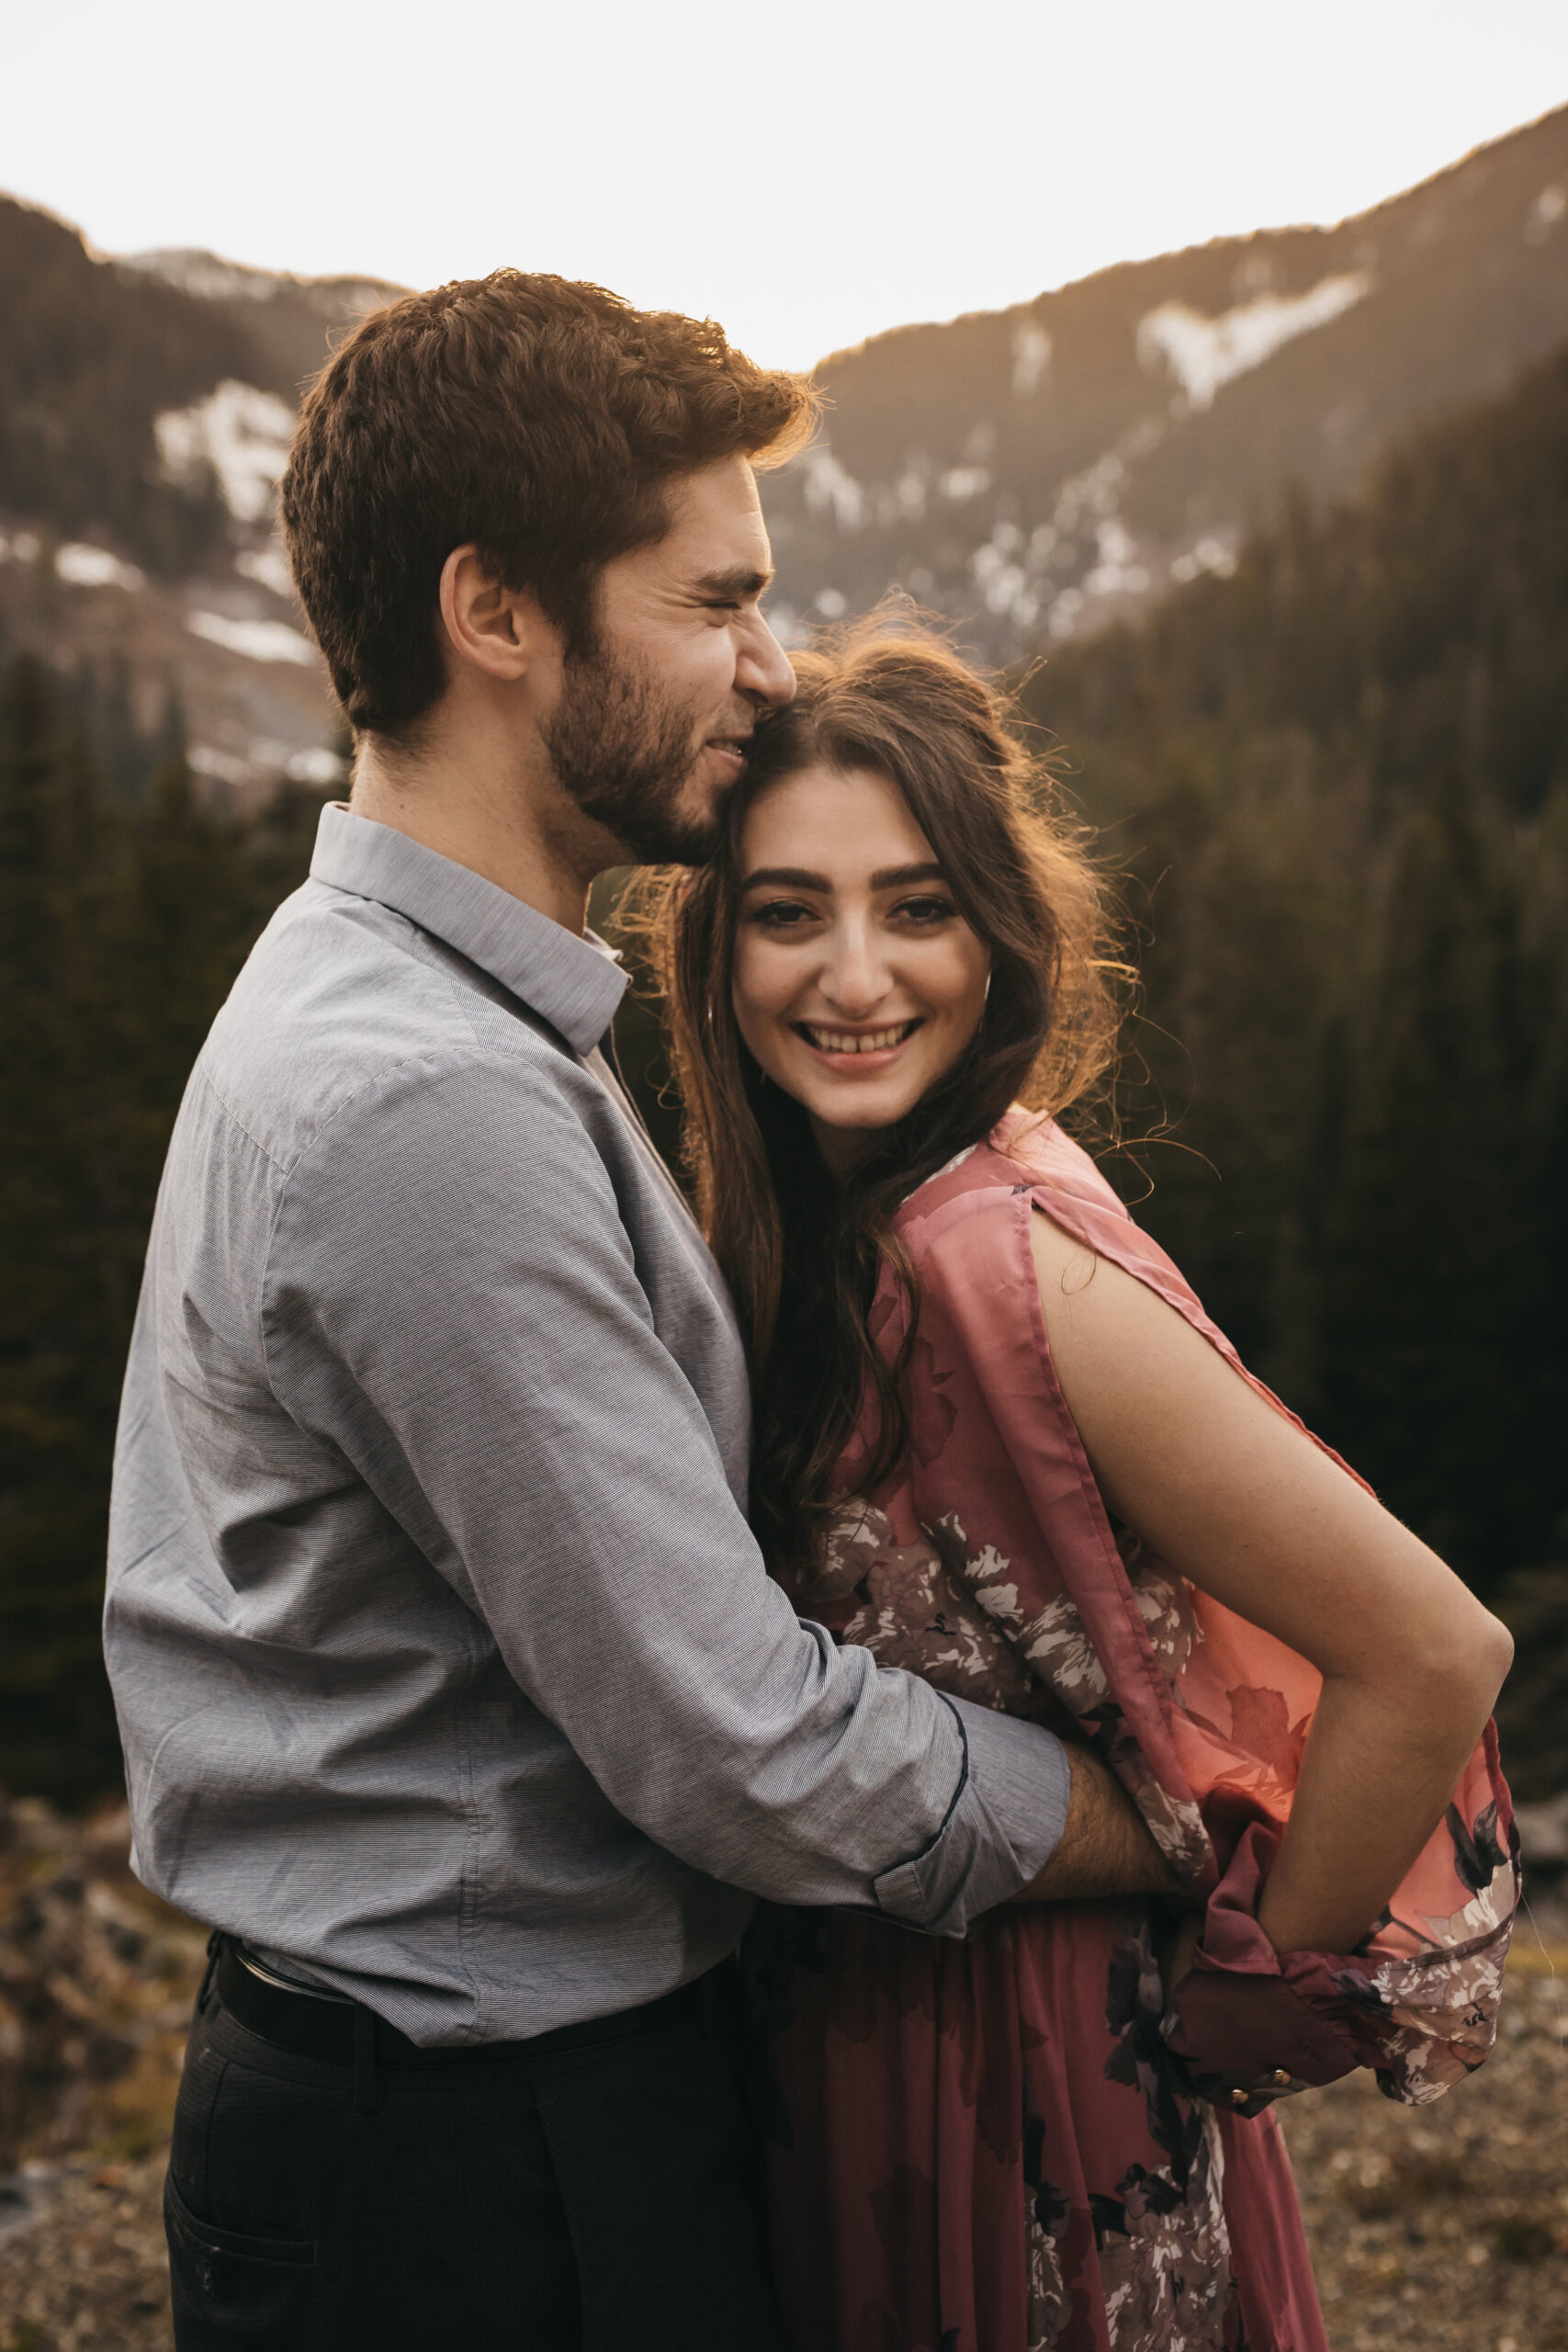 Snoqualmie National Forest Engagement Session | Between the Pine Adventure Elopement Photography